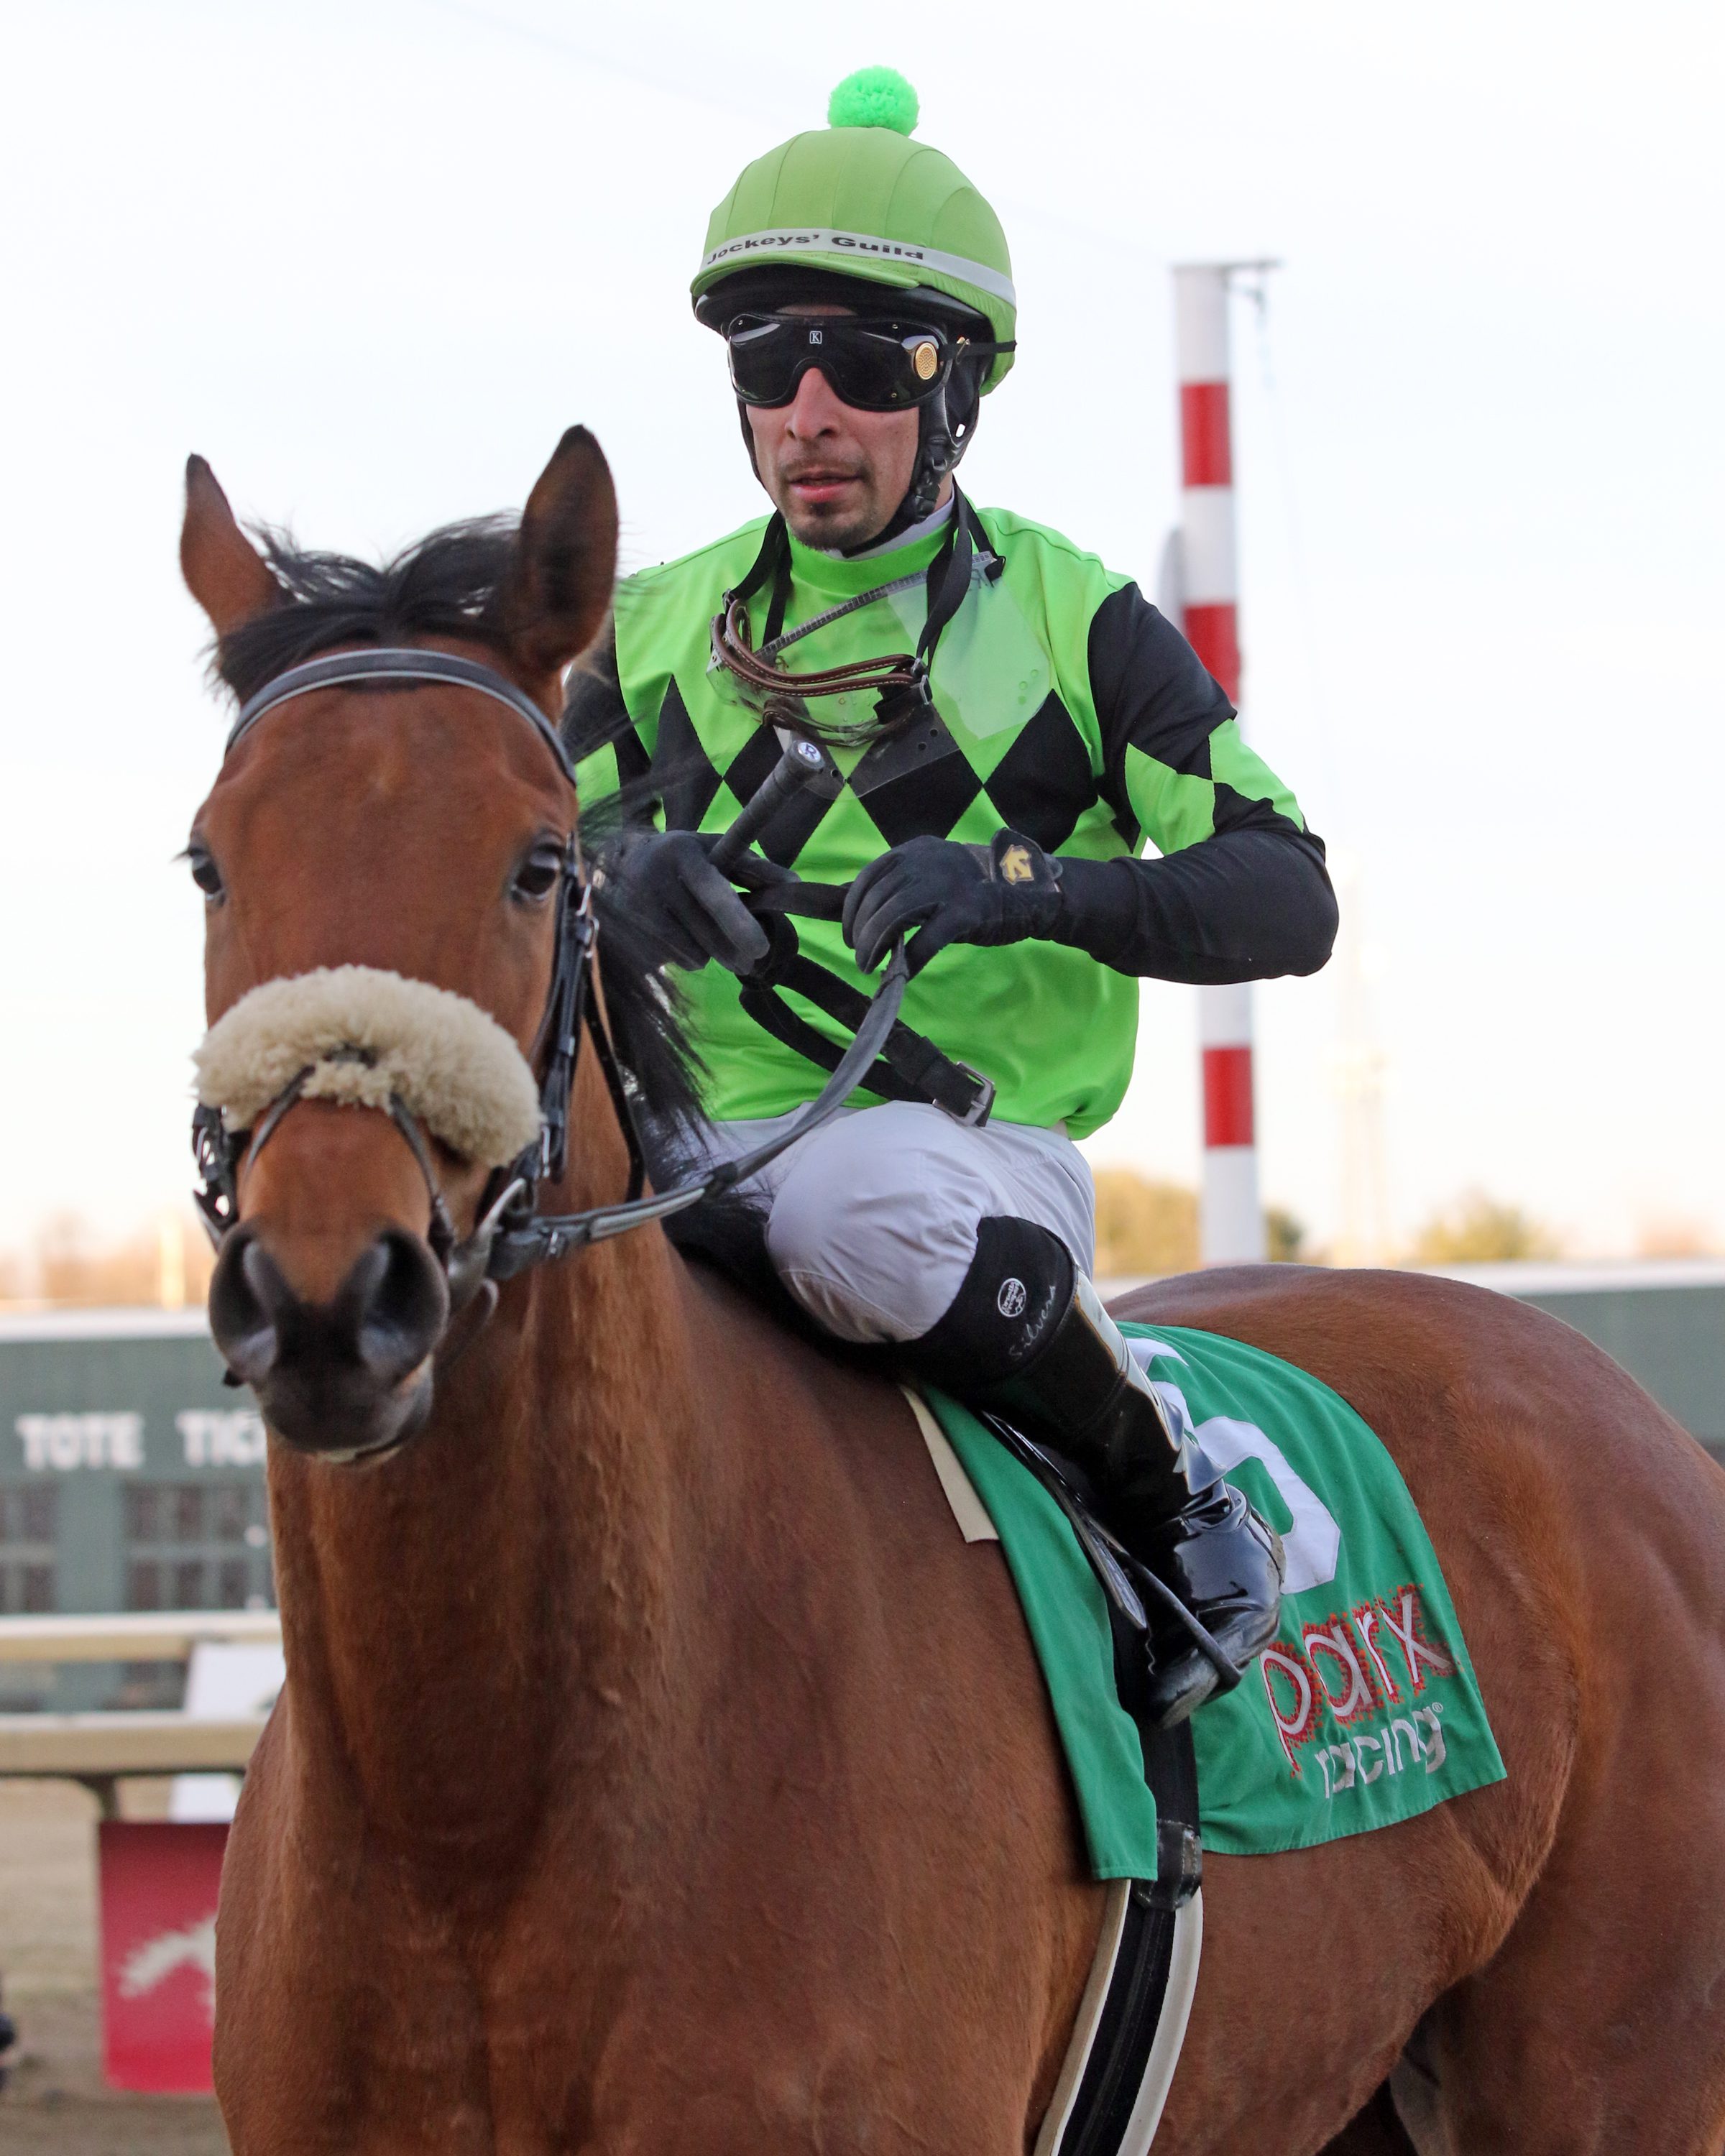 Twisted Ride with Ruben Silvera after winning The City of Brotherly Love at Parx on March 8, 2022. Photo By: Chad B. Harmon